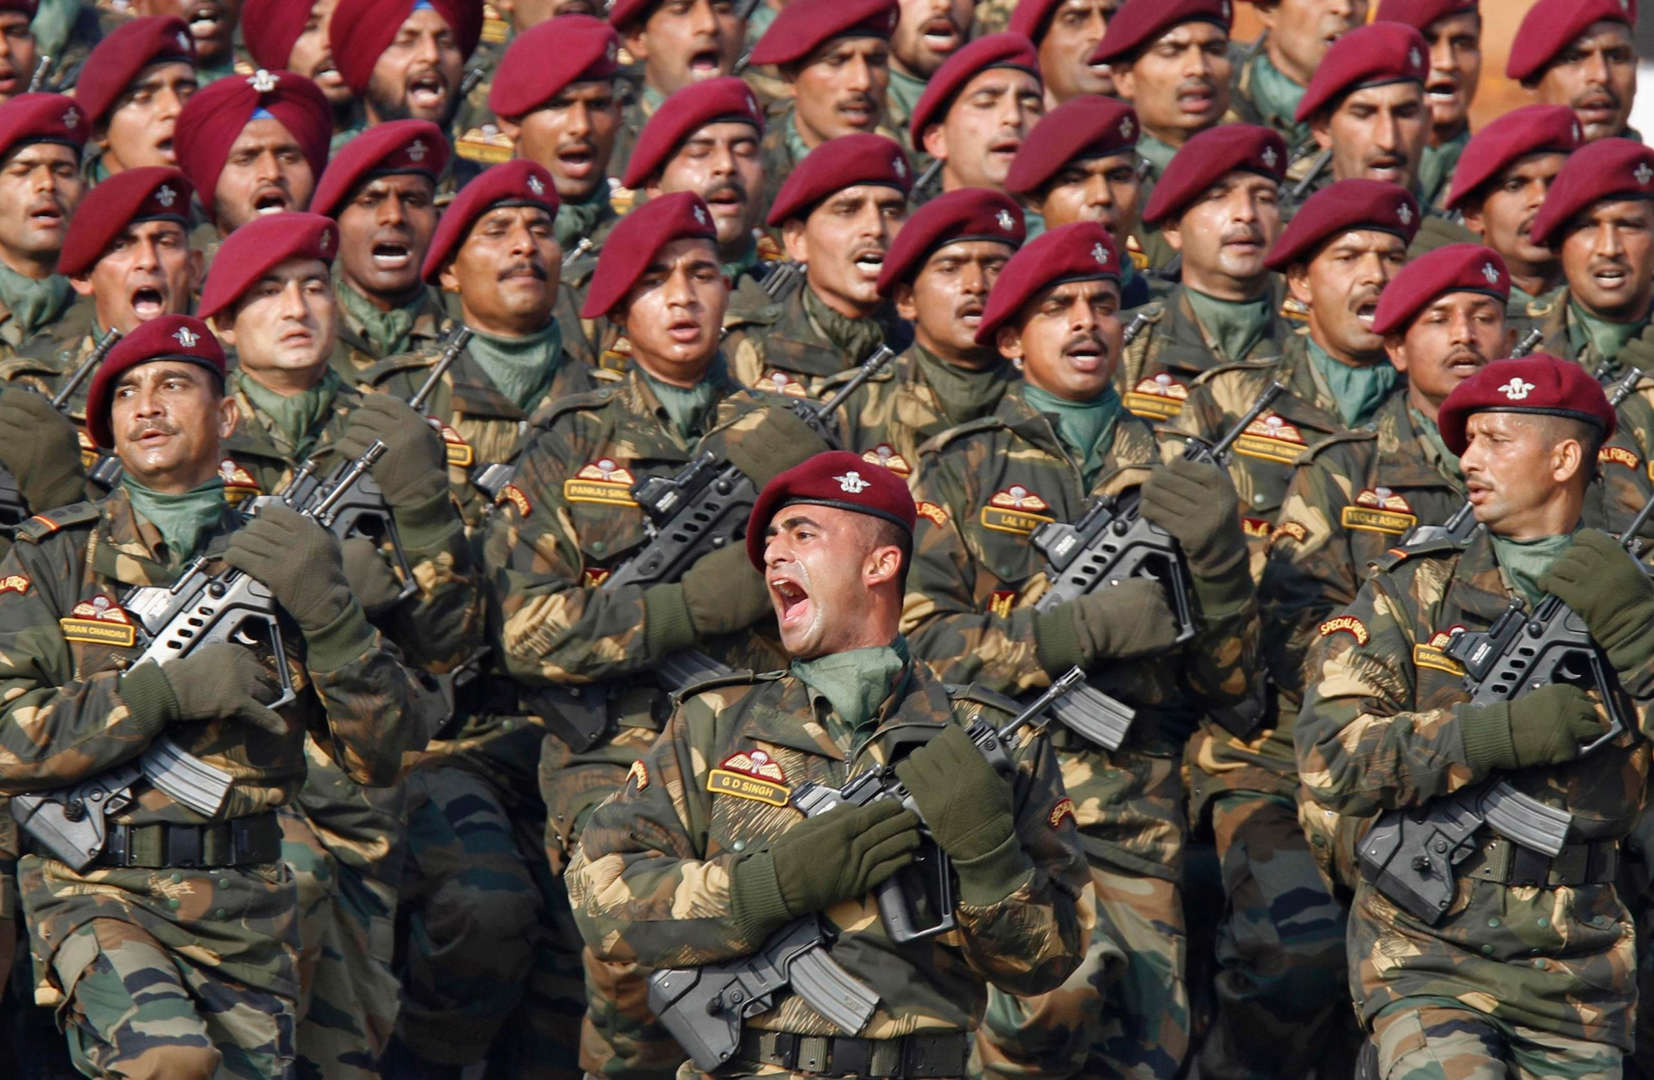 Indian Special Forces commando G. D. Singh shouts as he leads his battalion during the Republic Day parade in New Delhi January 26, 2012.